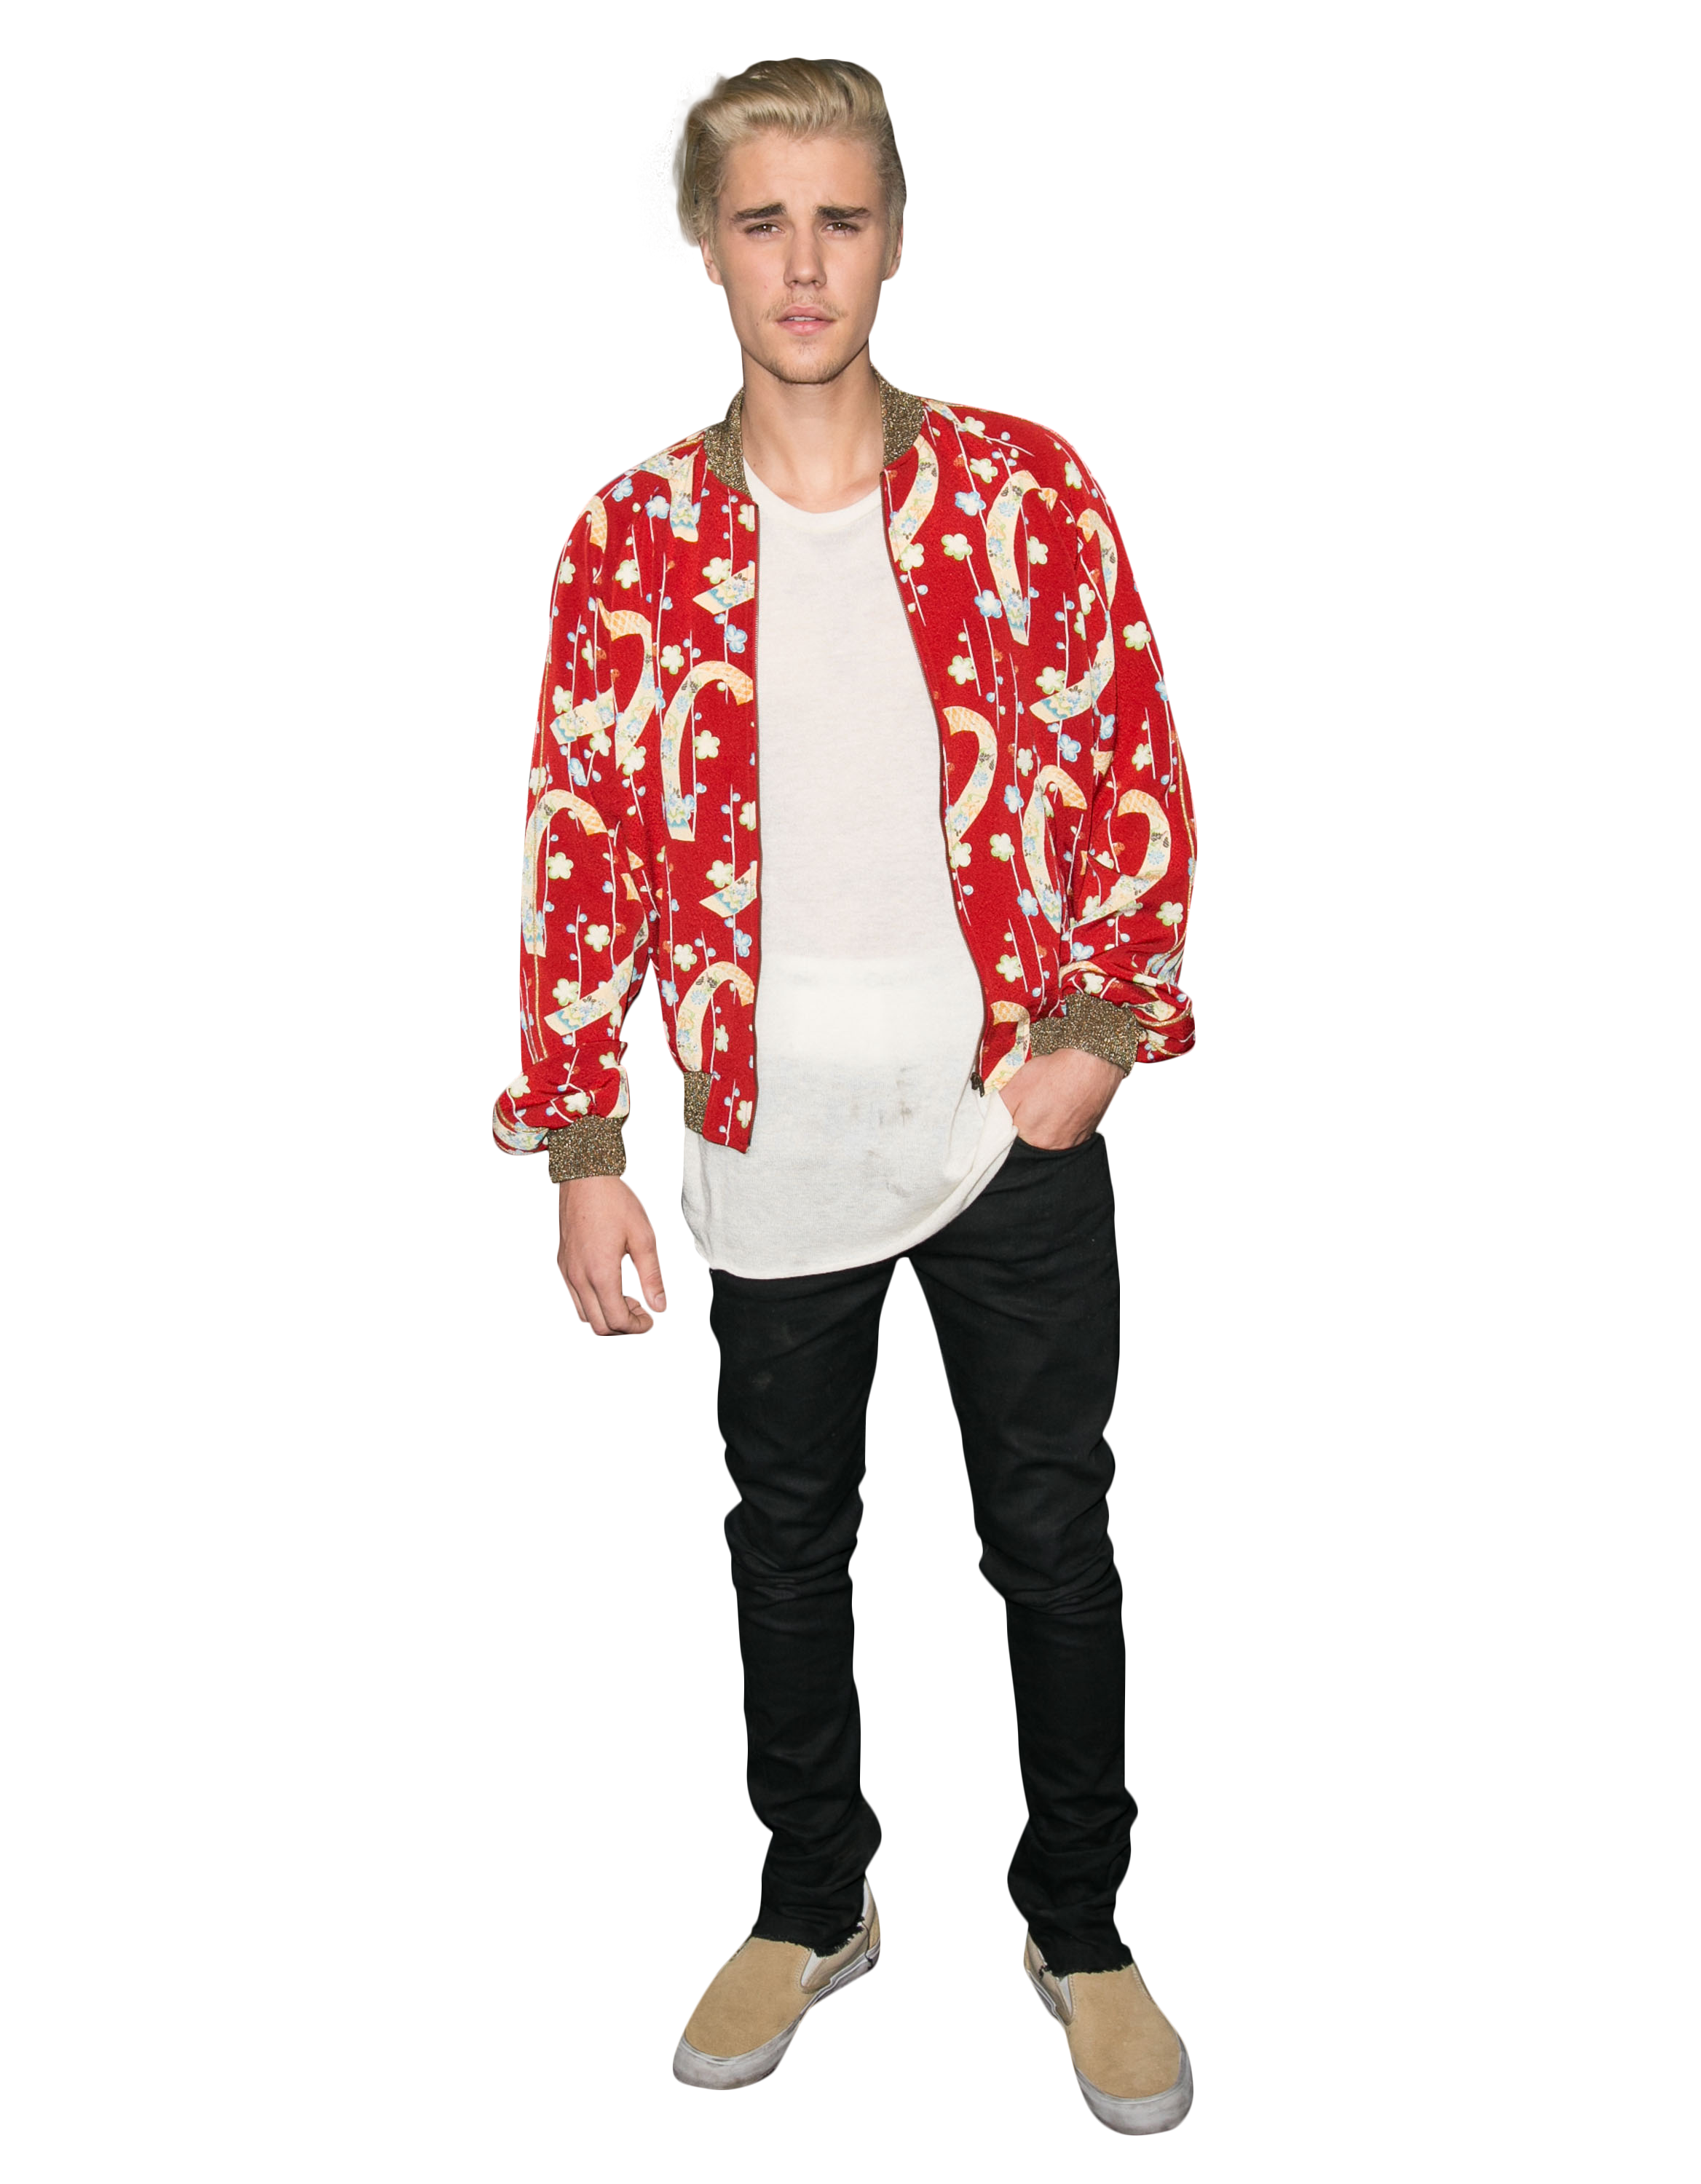 Justin Bieber dressed in a Red Shirt PNG Image